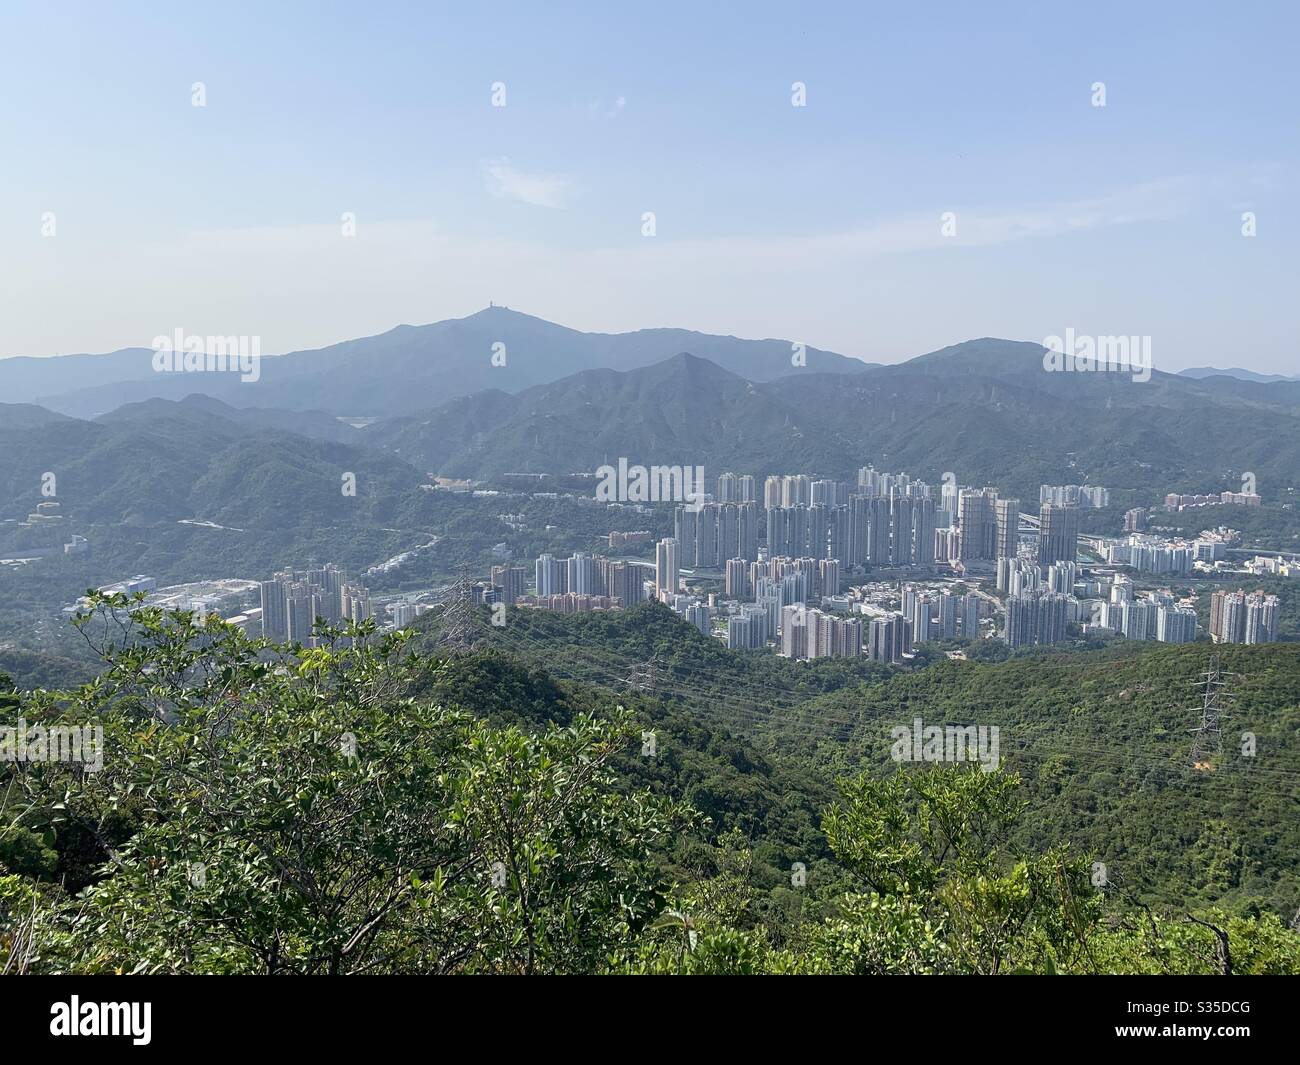 Building, mountain view, mountain road, hill, park, perk, nature, natural Stock Photo